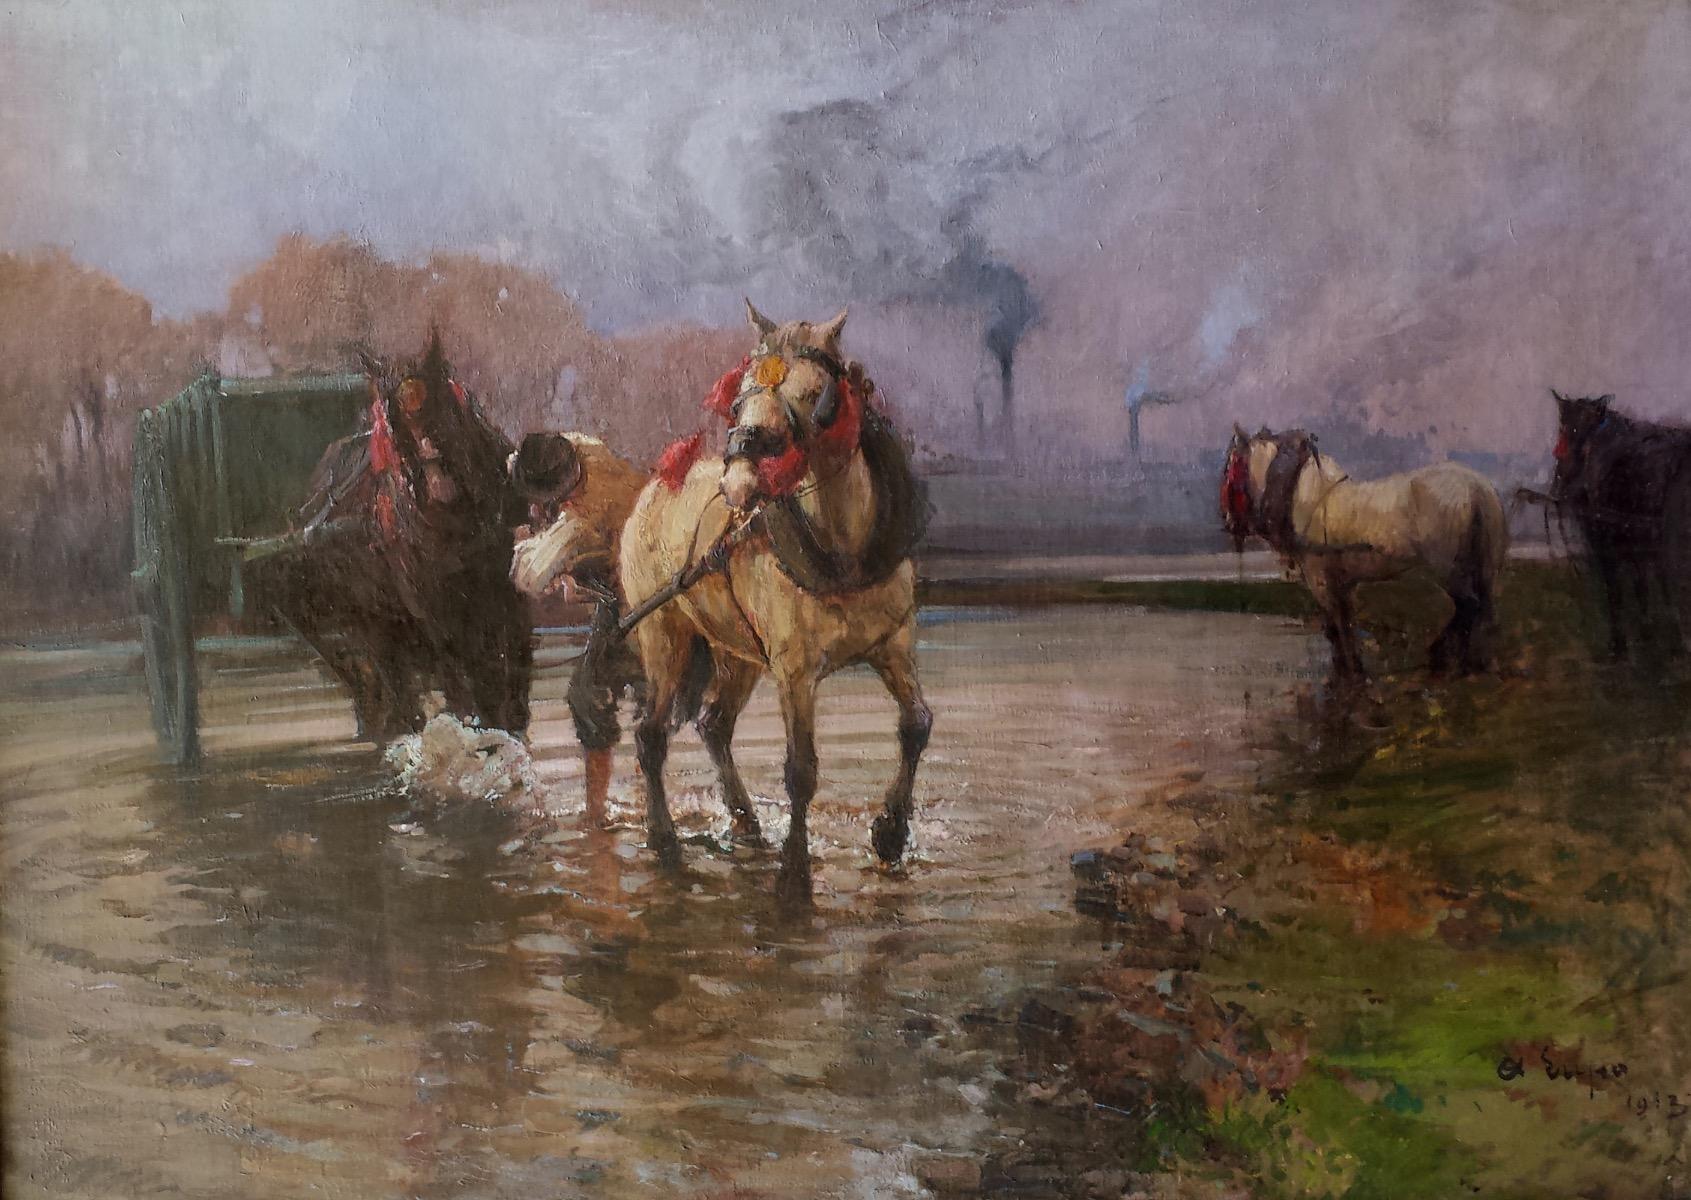 Working Horses - Oil on Canvas by Alessandro Lupo - 1913